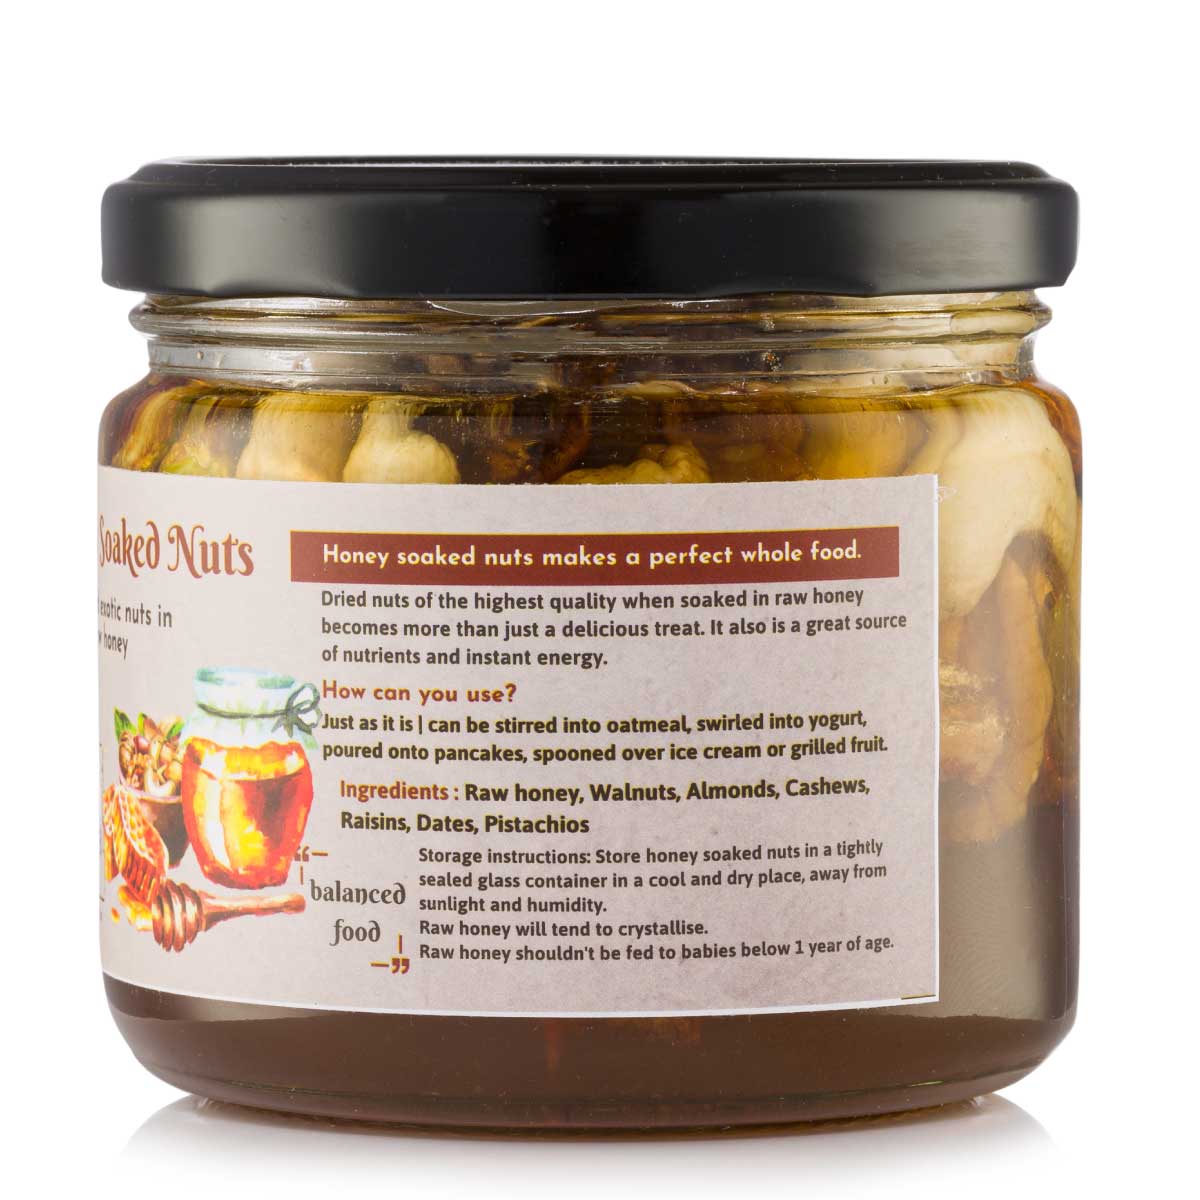 
                  
                    Honey and Spice Nuts in Honey (350g)
                  
                